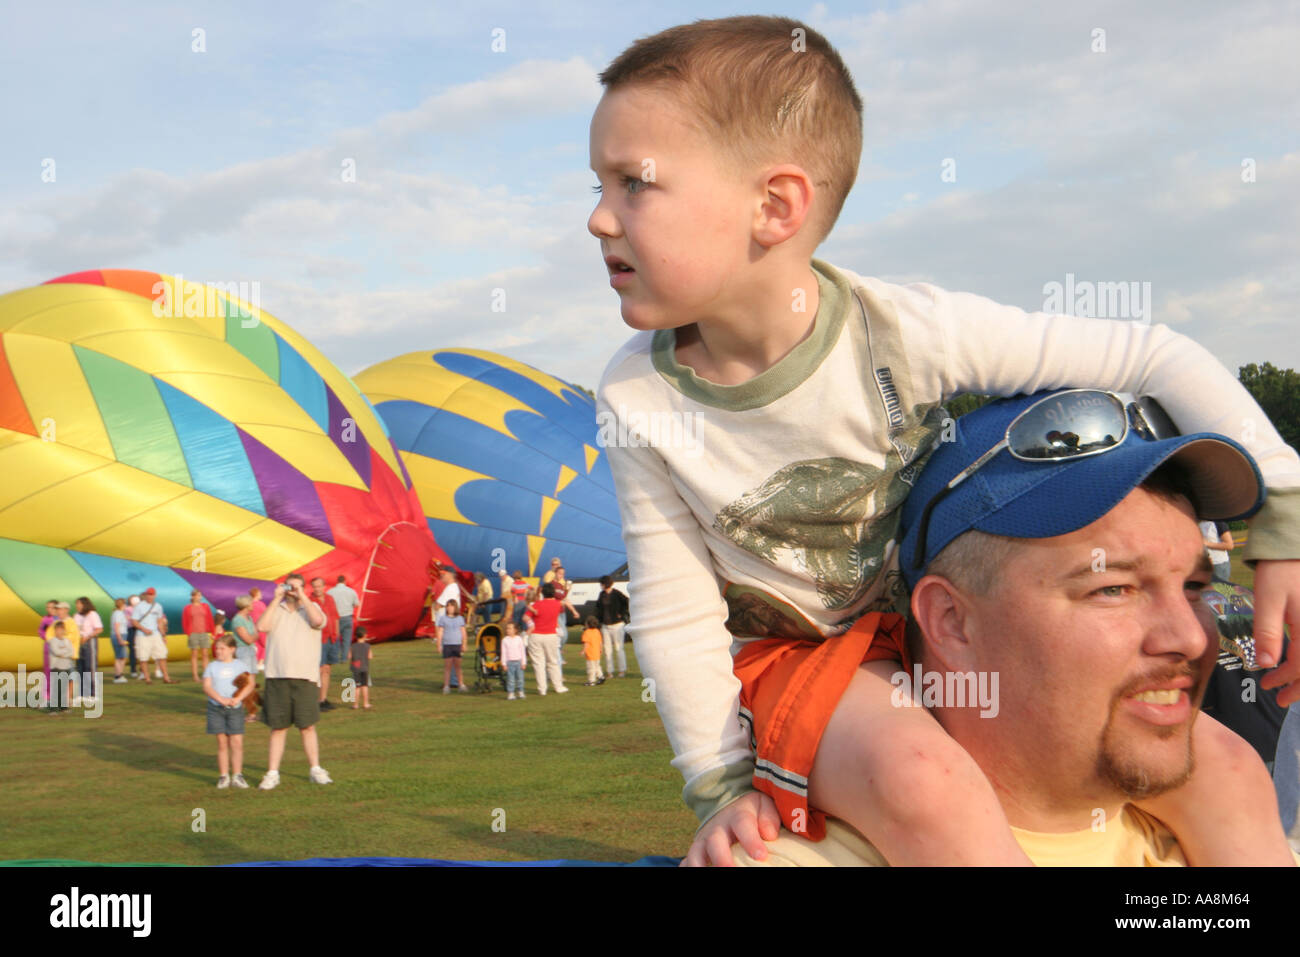 Alabama Morgan County,Decatur,Alabama Jubilee Hot Air Balloon Classic,flight,father dad,parent parents,son on shoulders,visitors travel traveling tour Stock Photo